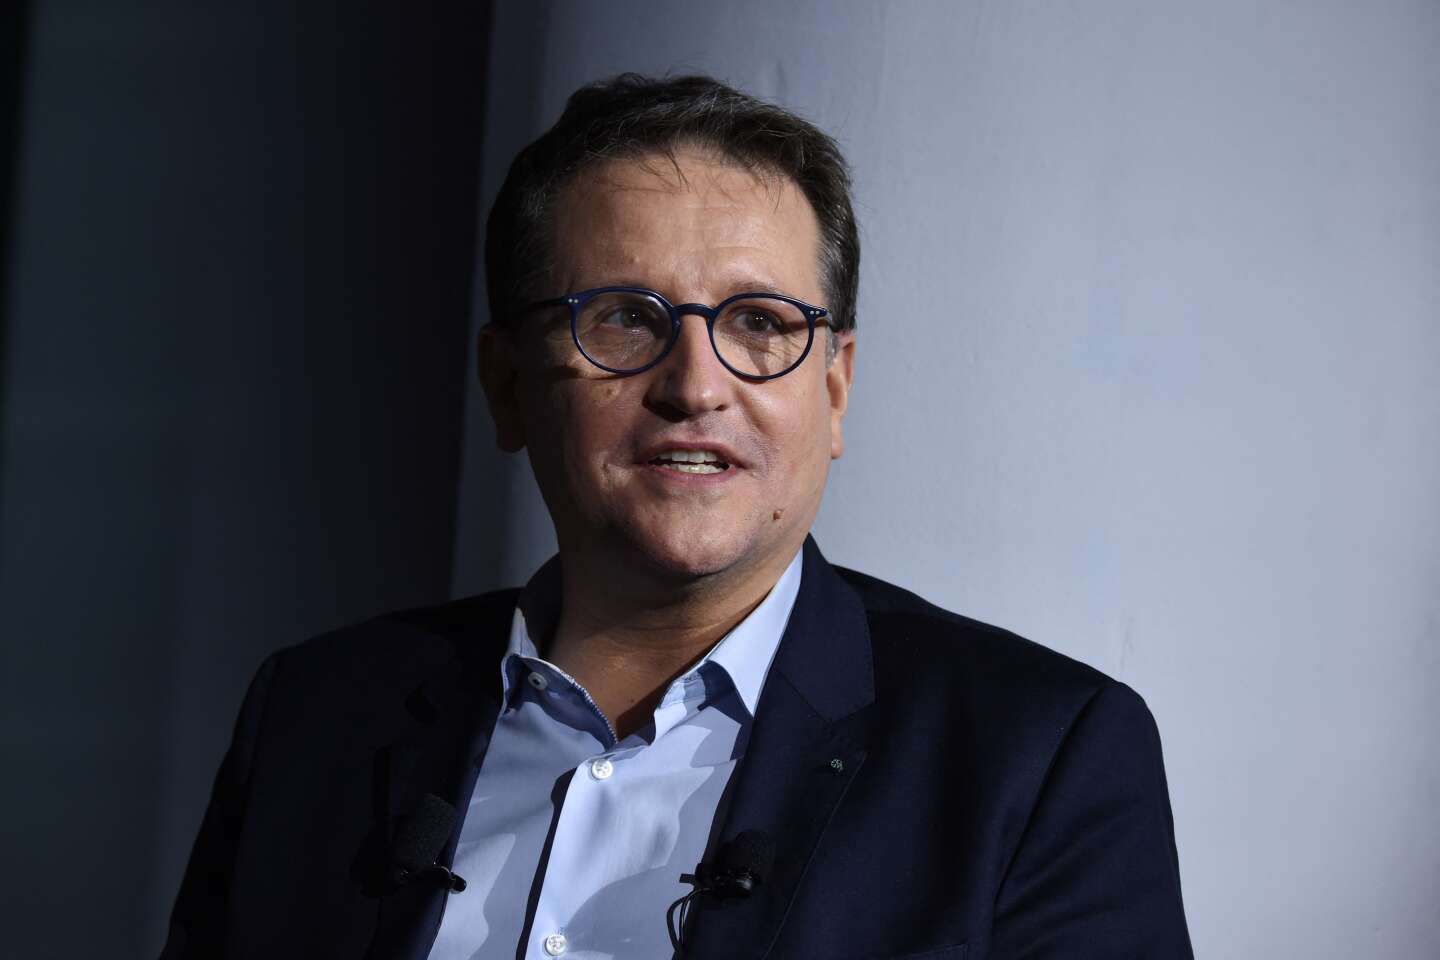 Rodolphe Belmer, the new CEO of TF1, defends his channel against Arcom